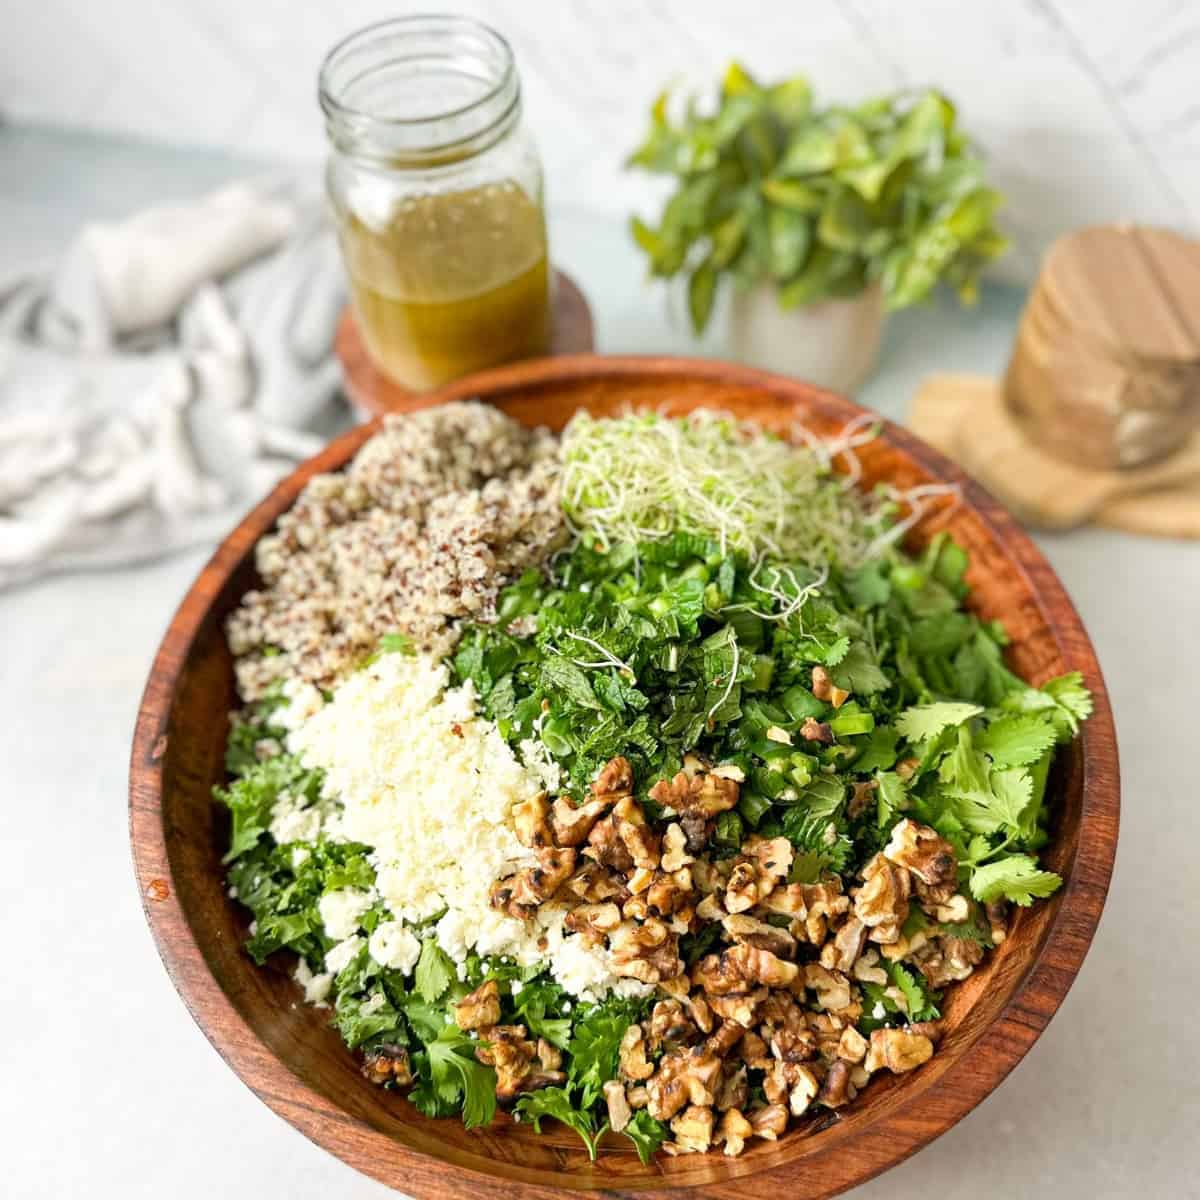 You won't try anything else after trying apple cider vinaigrette, a tasty homemade salad dressing that goes well with practically any salad.